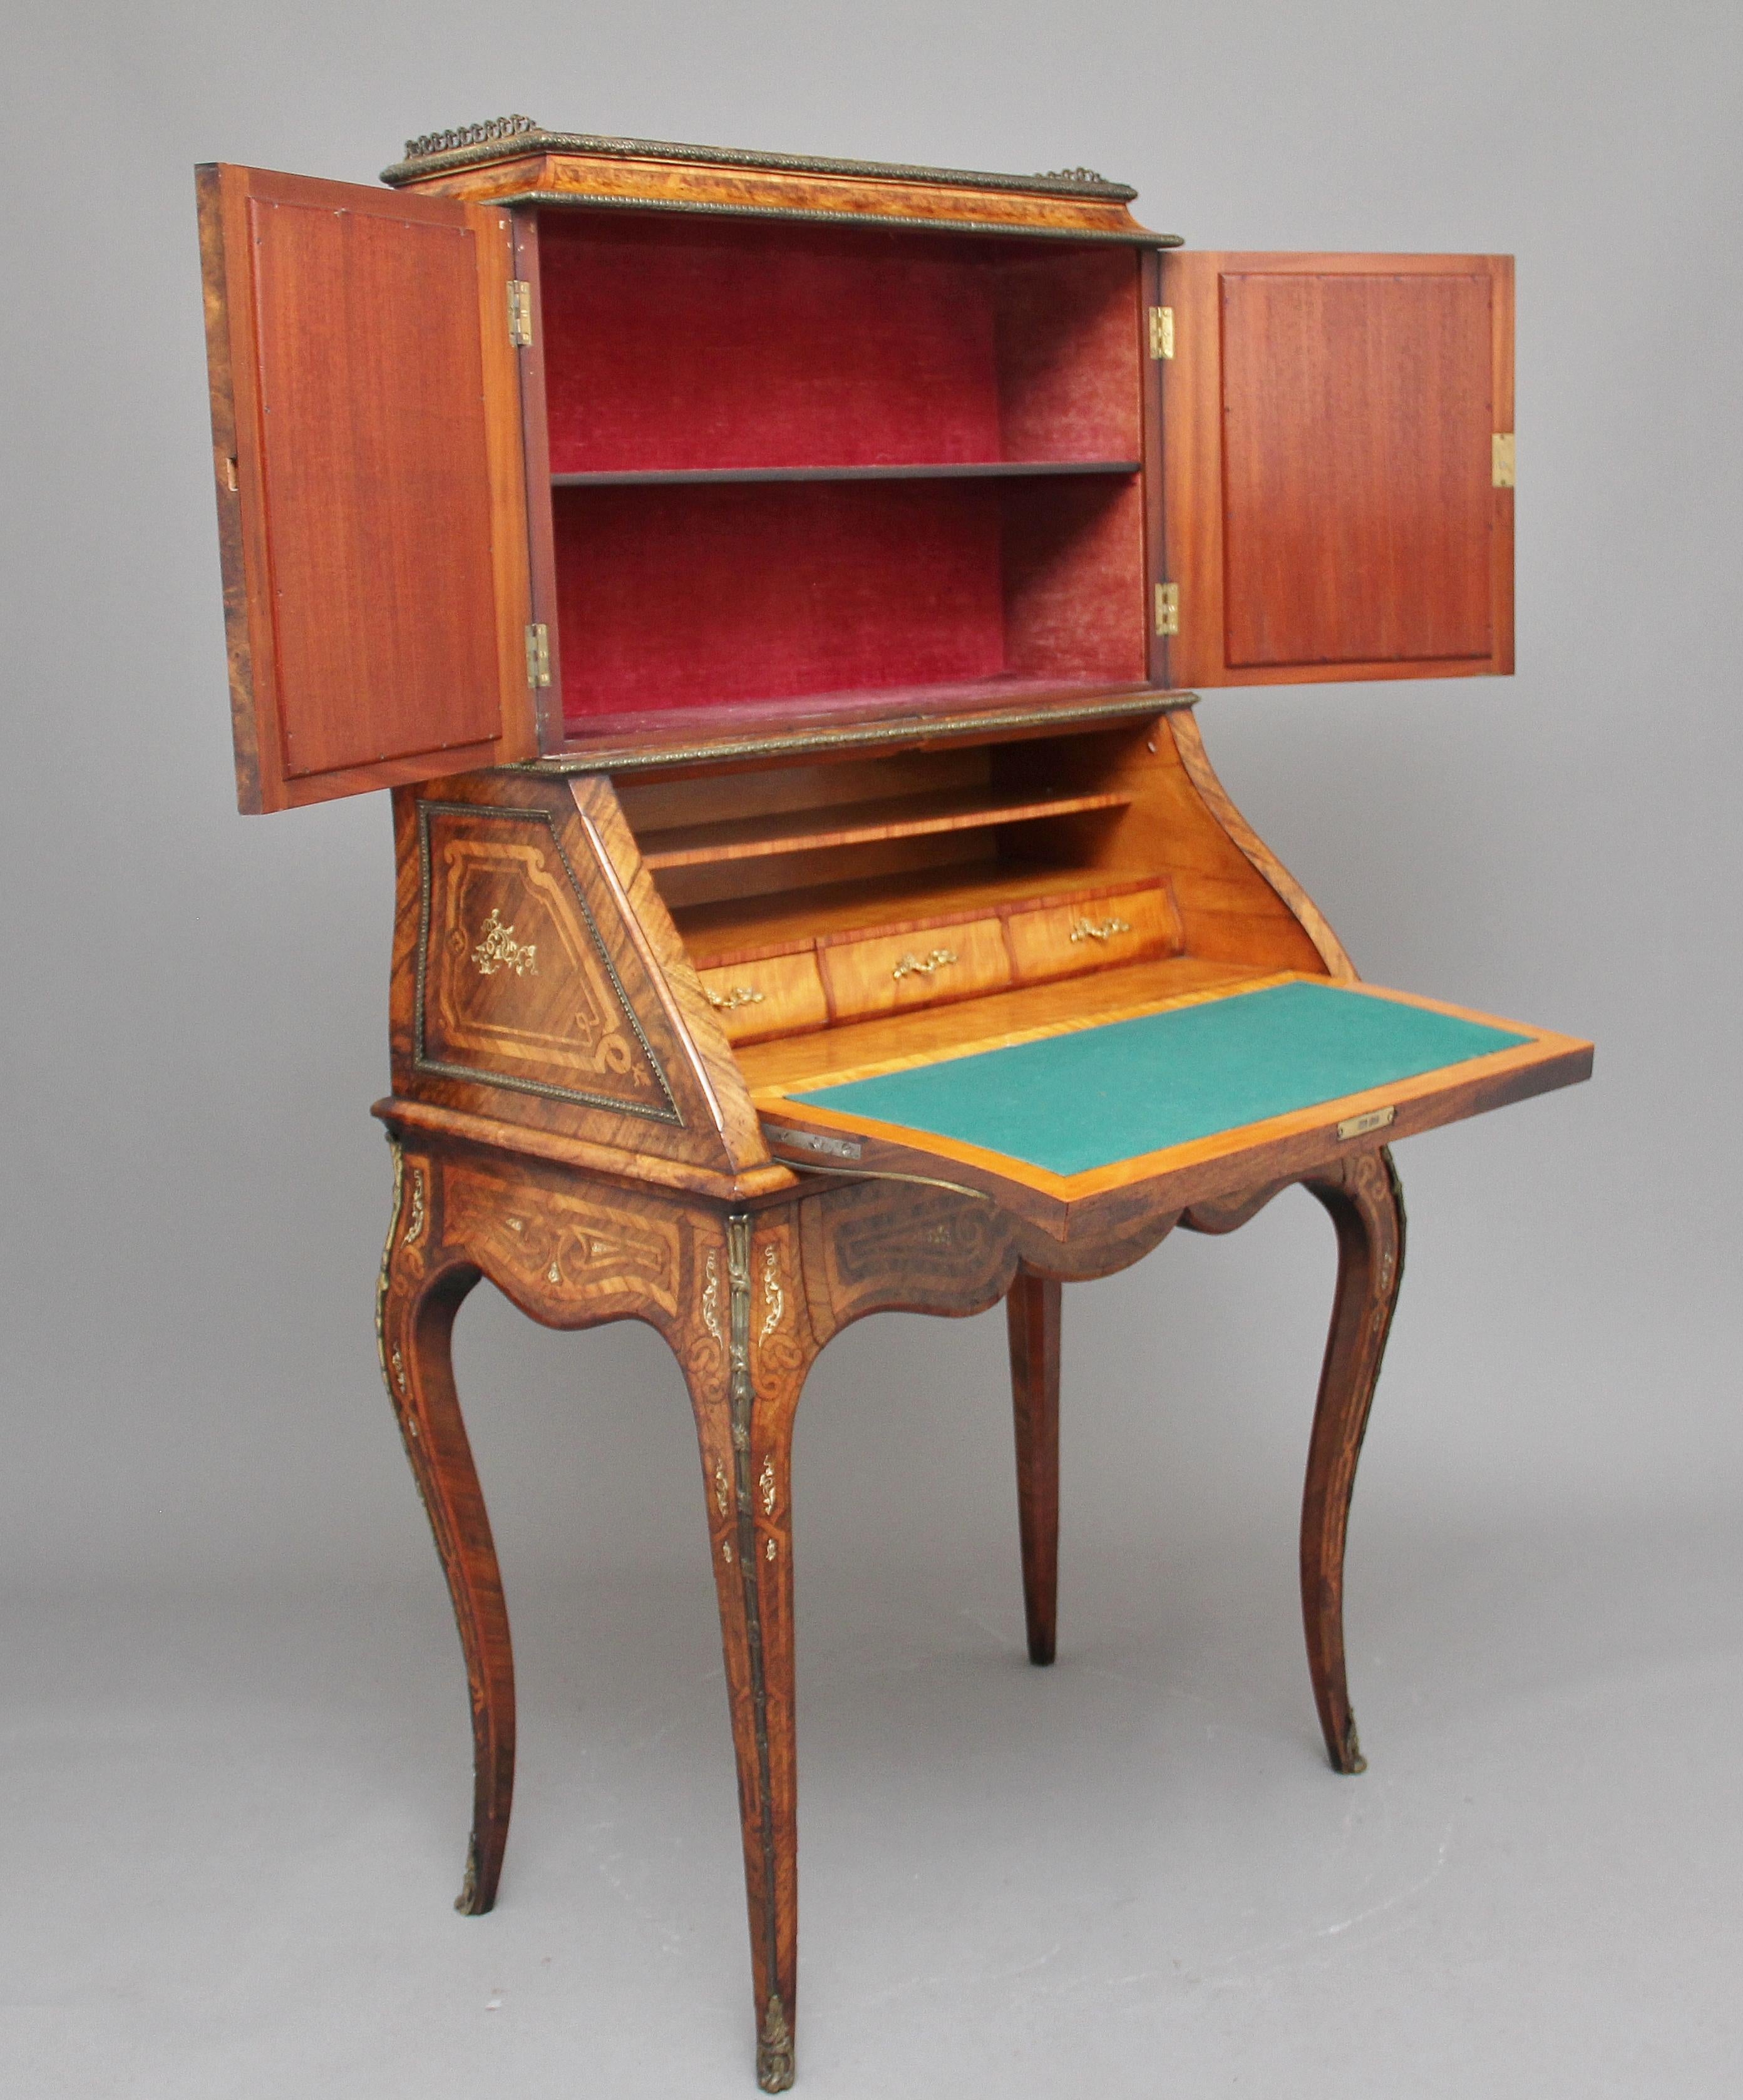 19th century French walnut and kingwood bureau de dame, the rectangular top decorated with brass gallery, carved ormolu moulding below on the top and bottom of the frieze, the top section having two mirrored glass doors with ormolu moulding, opening